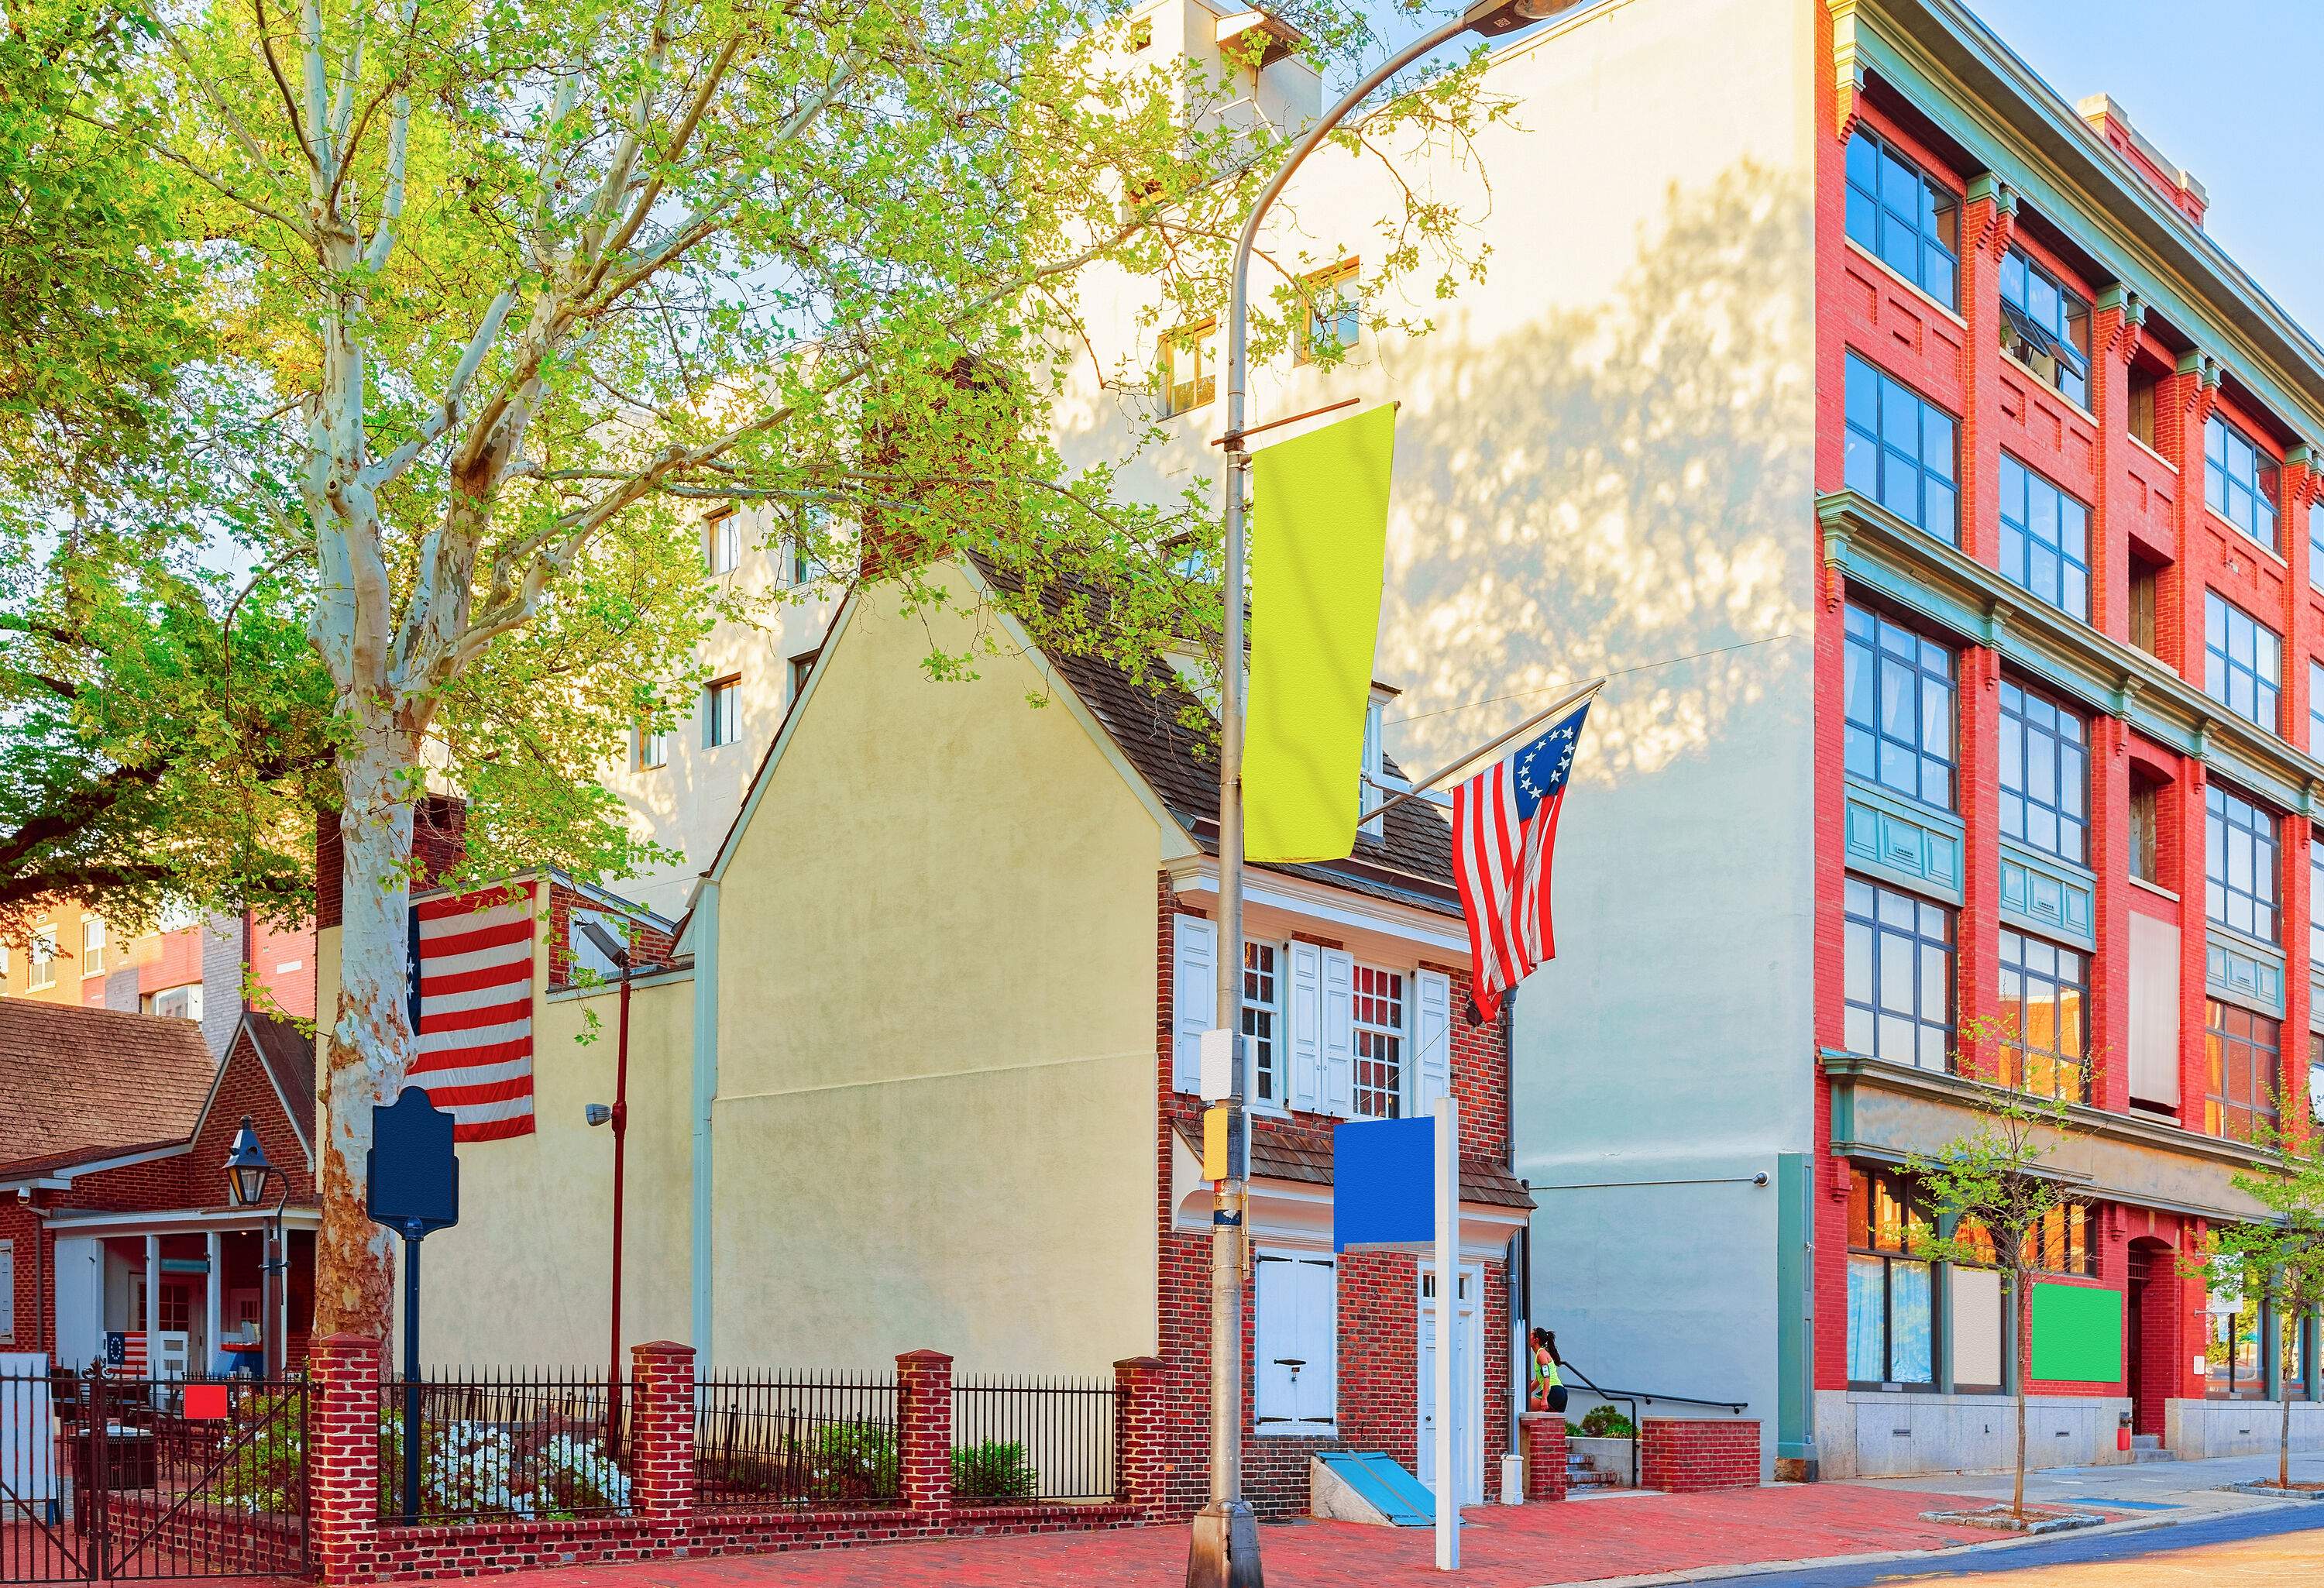 The Betsy Ross House and an adjacent building with glass-paned windows standing out on a vibrant Philadelphia street.